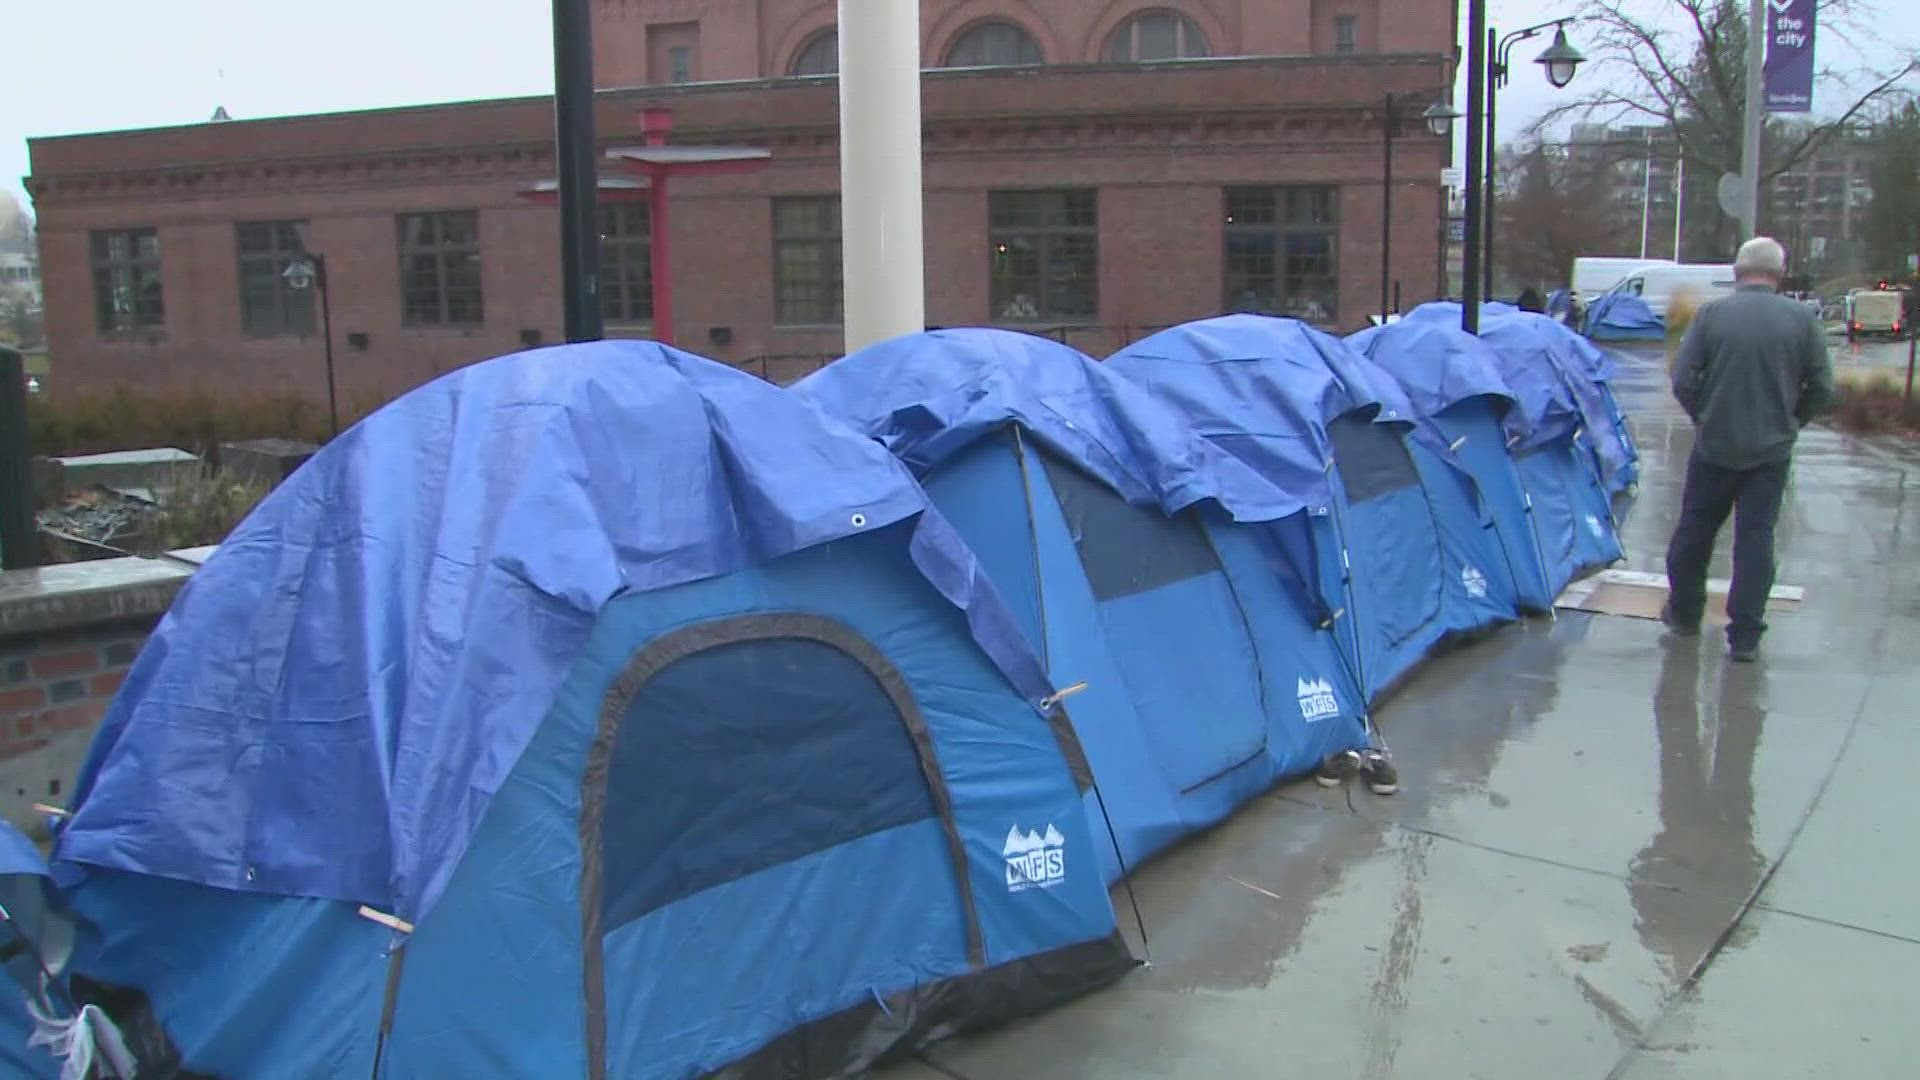 Spokane attorney says proposed camping ordinance is 'problematic.'